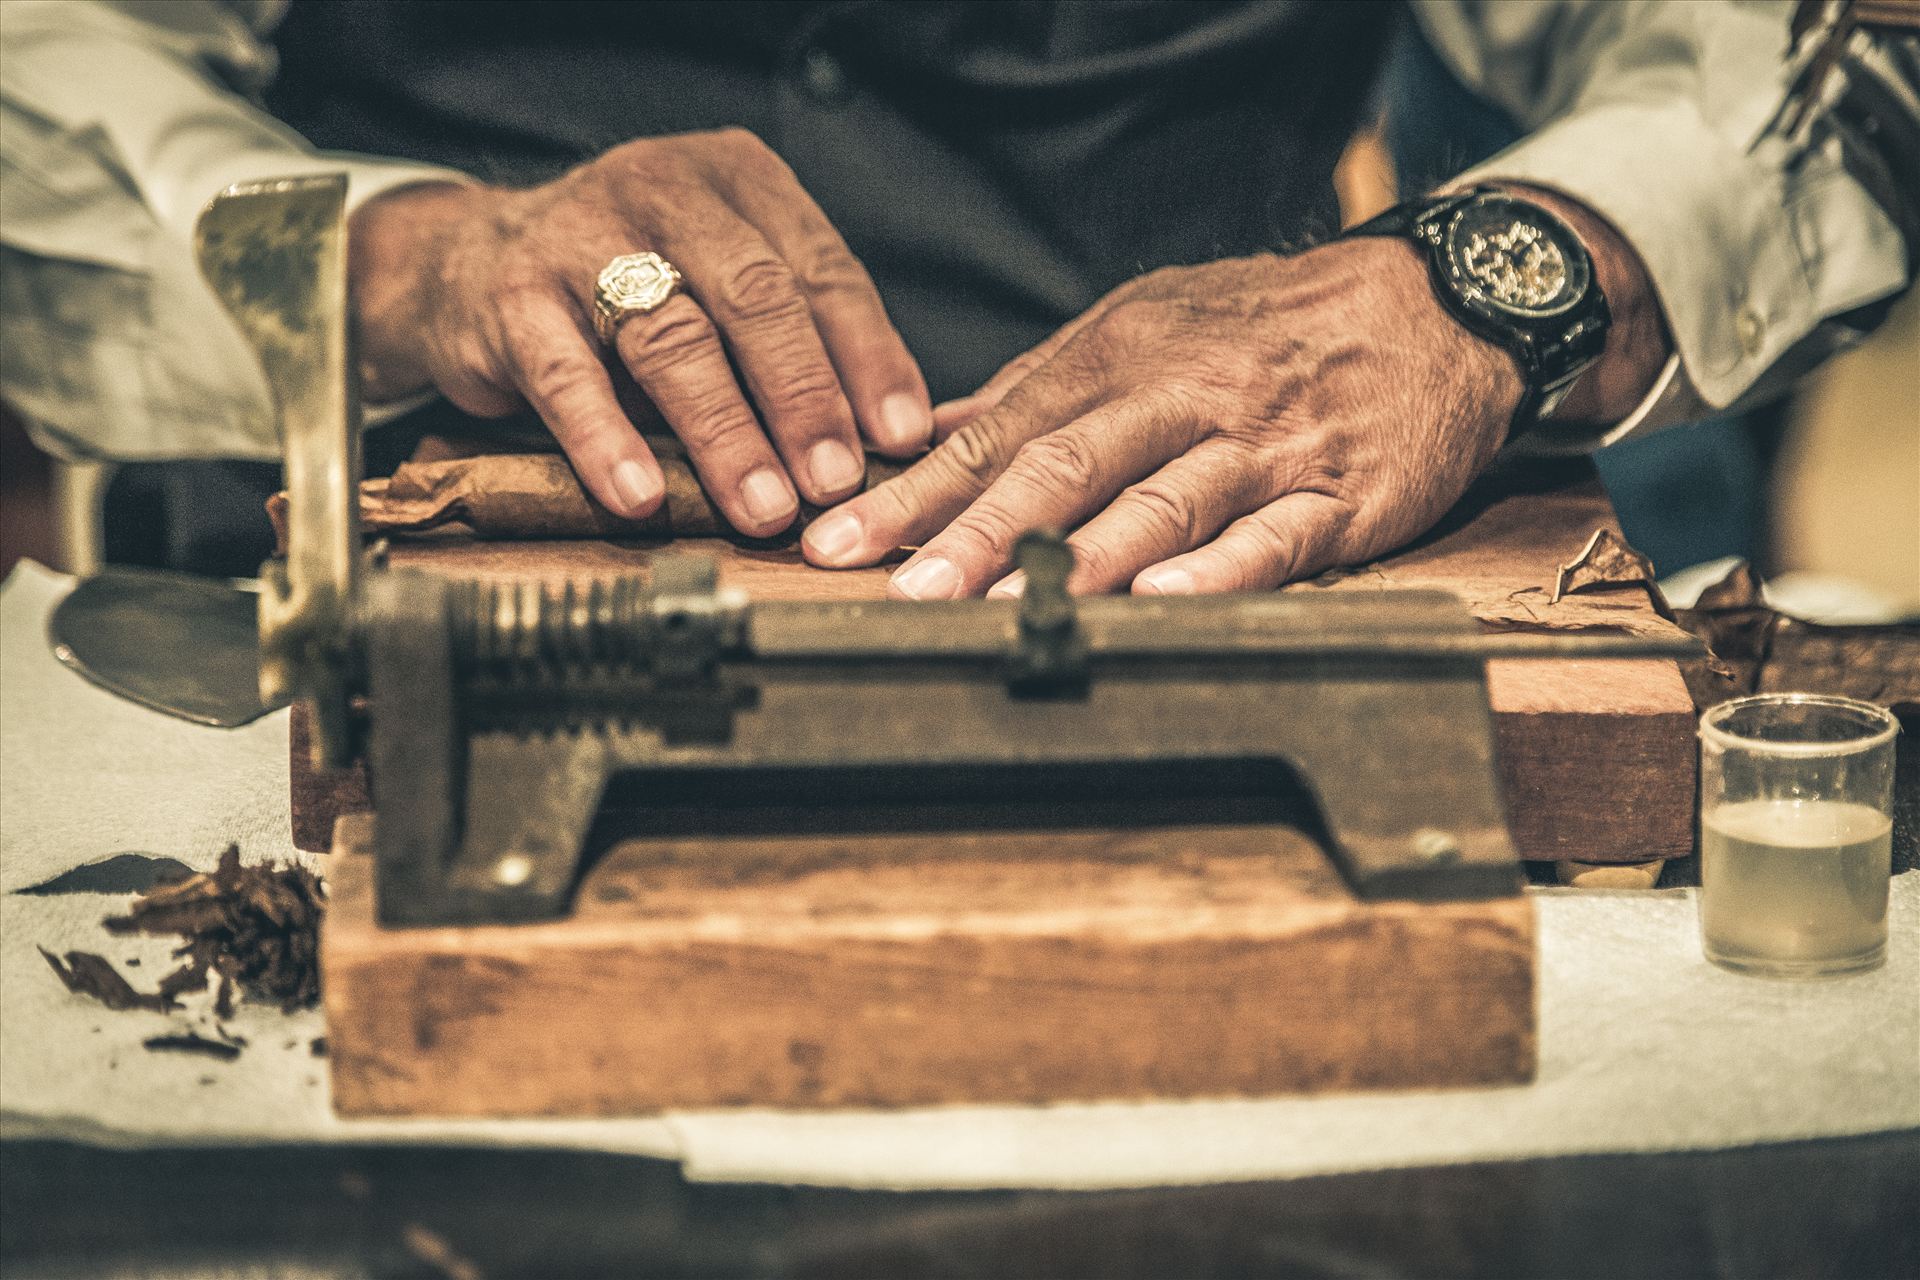 Rollin A skilled trocedor finshes a cigar with a fine wrap. by Scott Smith Photos